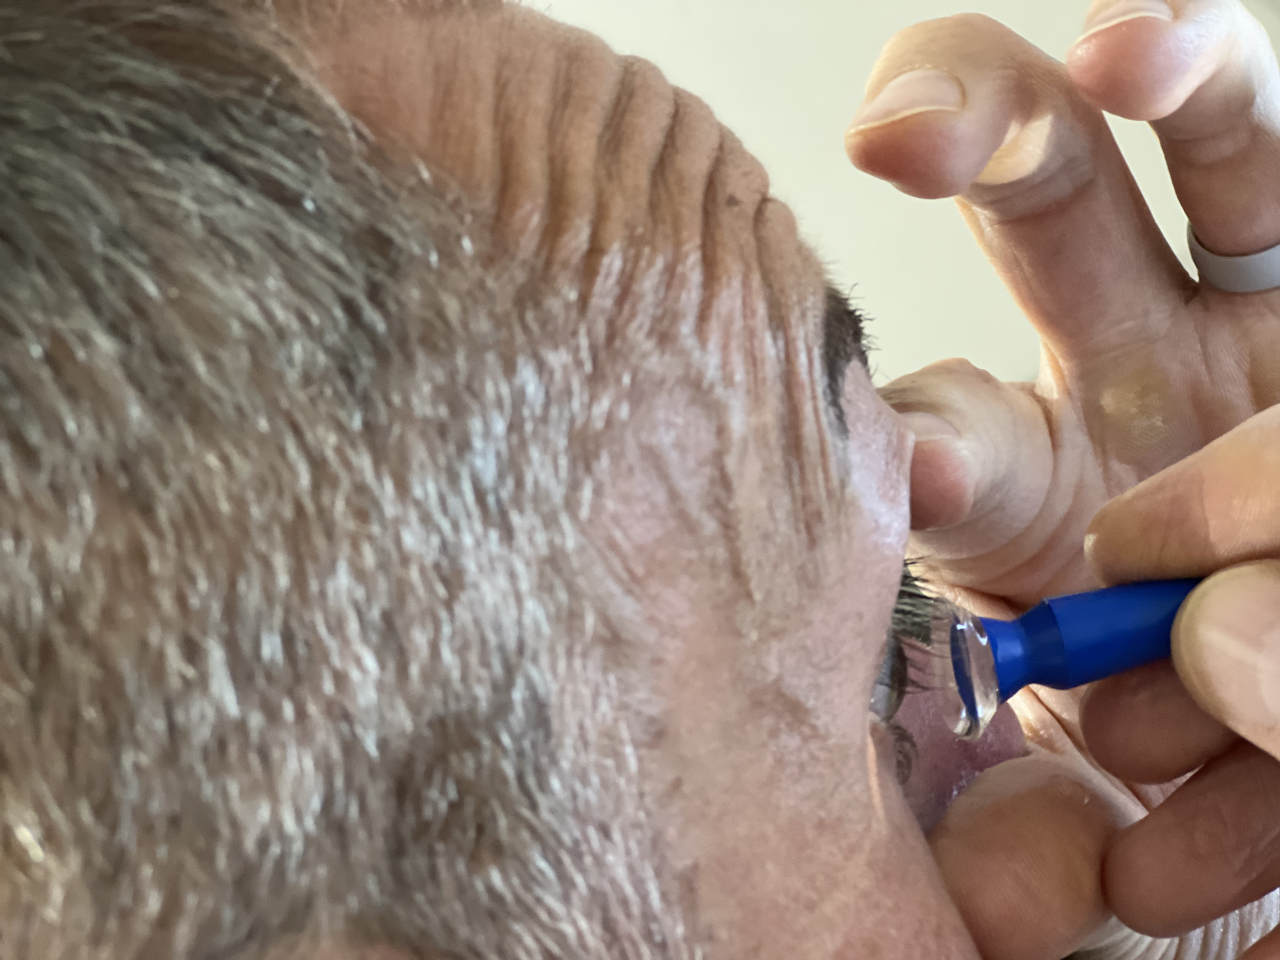 Man getting fitted with scleral lens